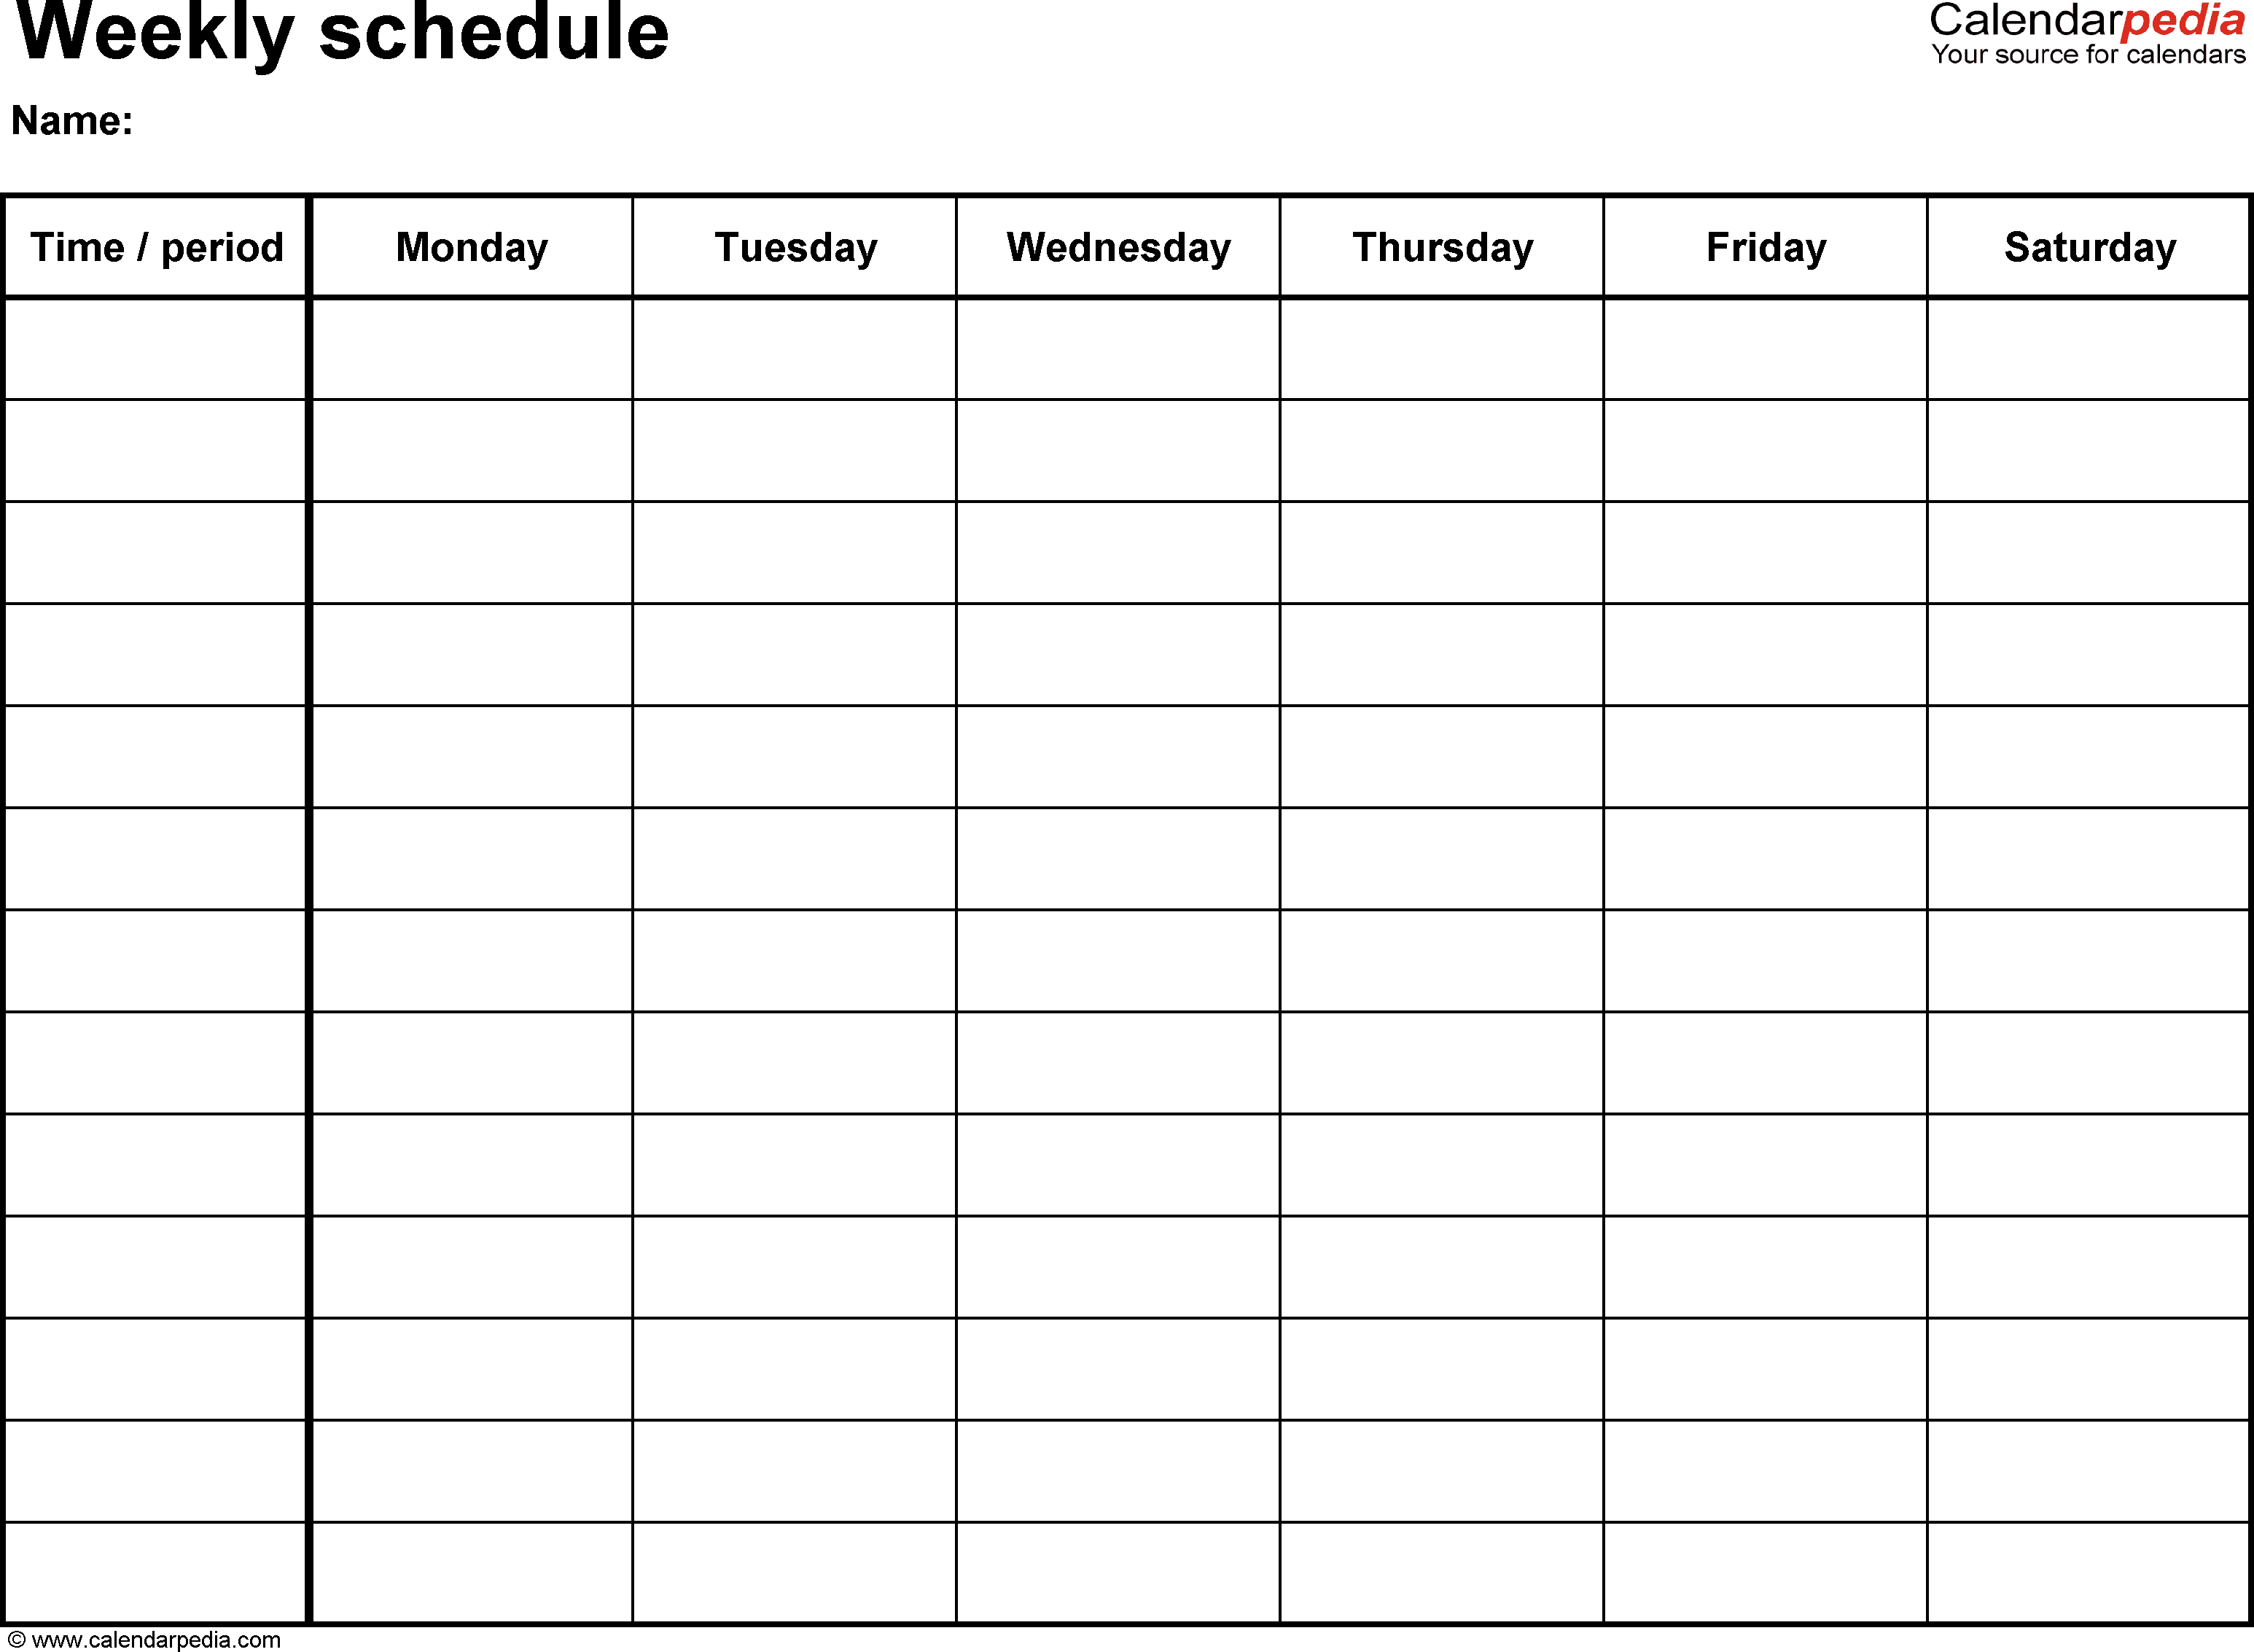 Free Weekly Schedule Templates For Word - 18 Templates And Employee Weekly Schedule Template